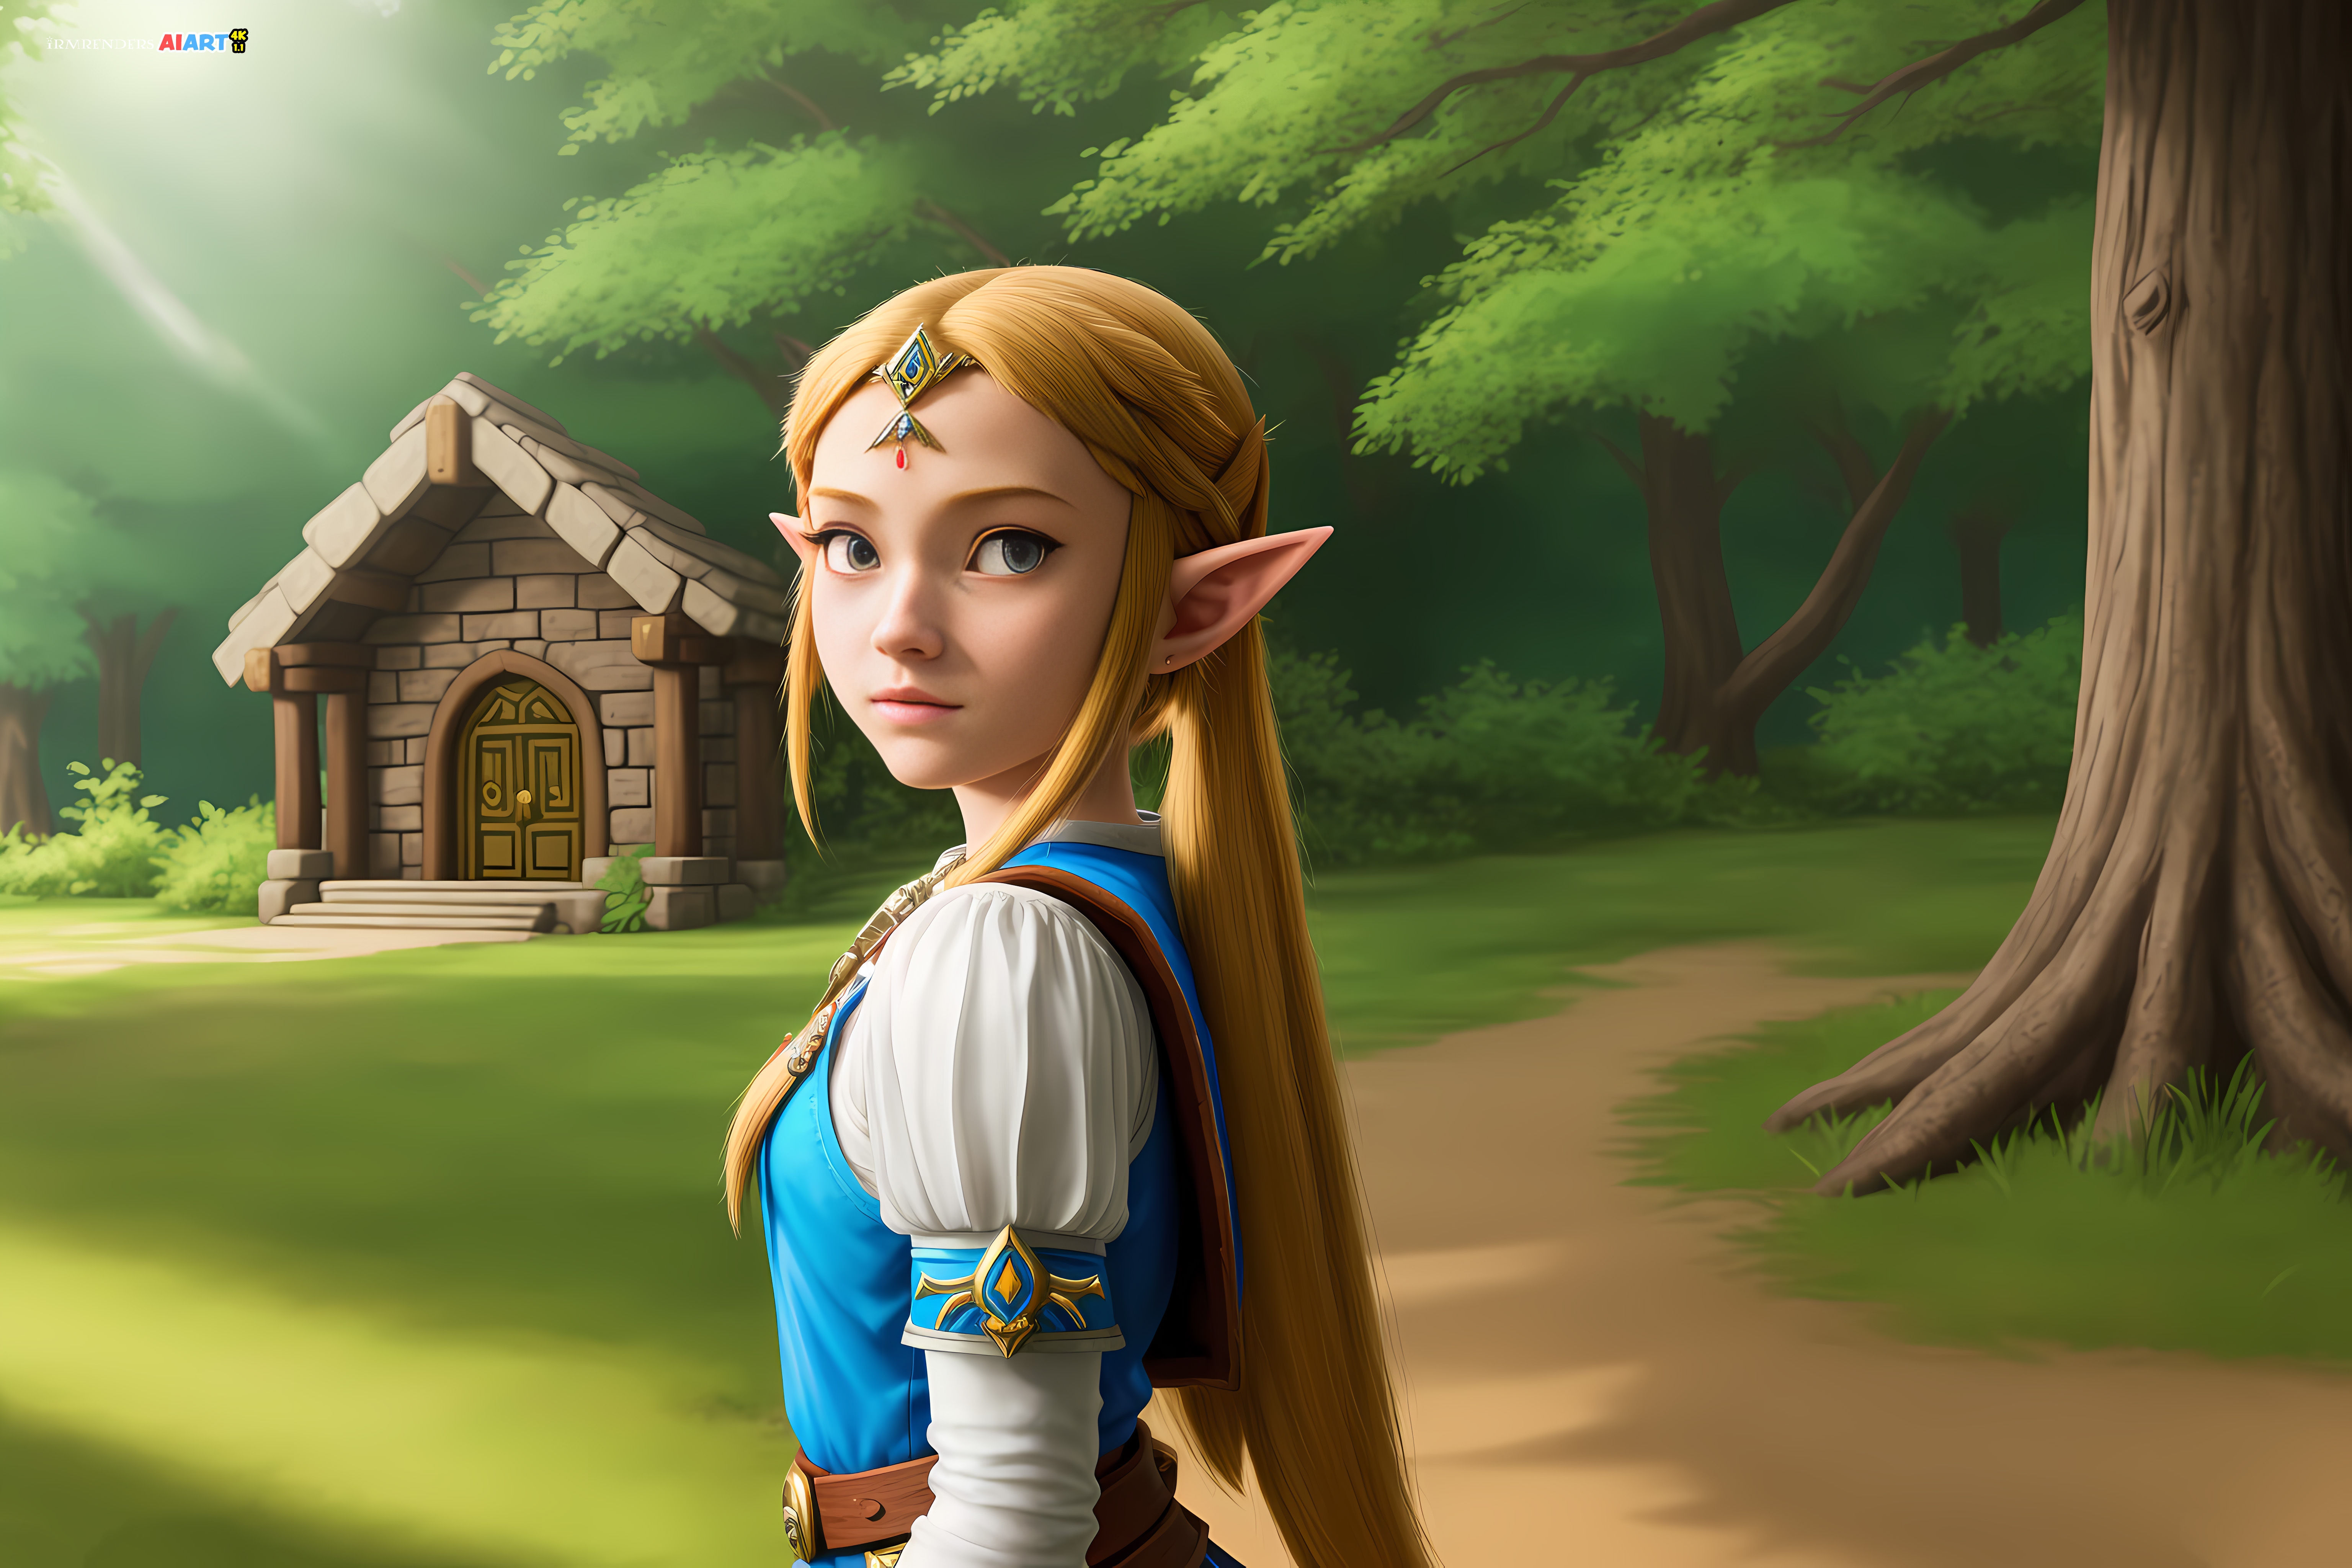 General 6144x4096 Zelda Zelda Breath of the Wild Nintendo blonde CGI AI art pointy ears long hair trees path sunlight grass video game girls video game characters